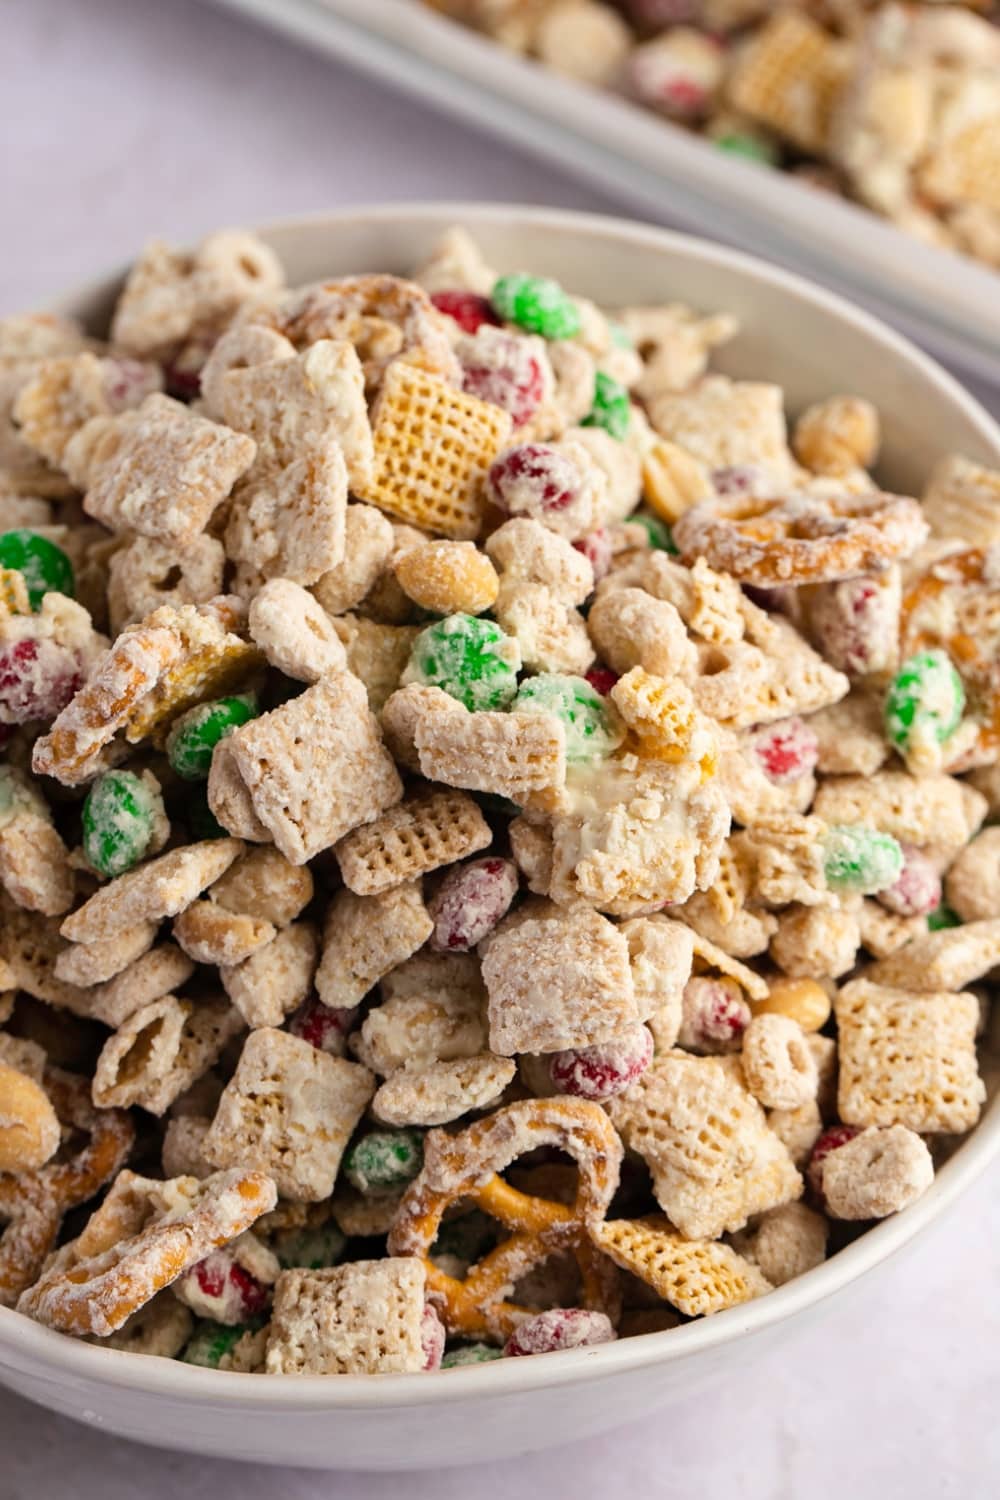 Homemade Christmas Trash with White Chocolate, Candy, Nuts and Cereal